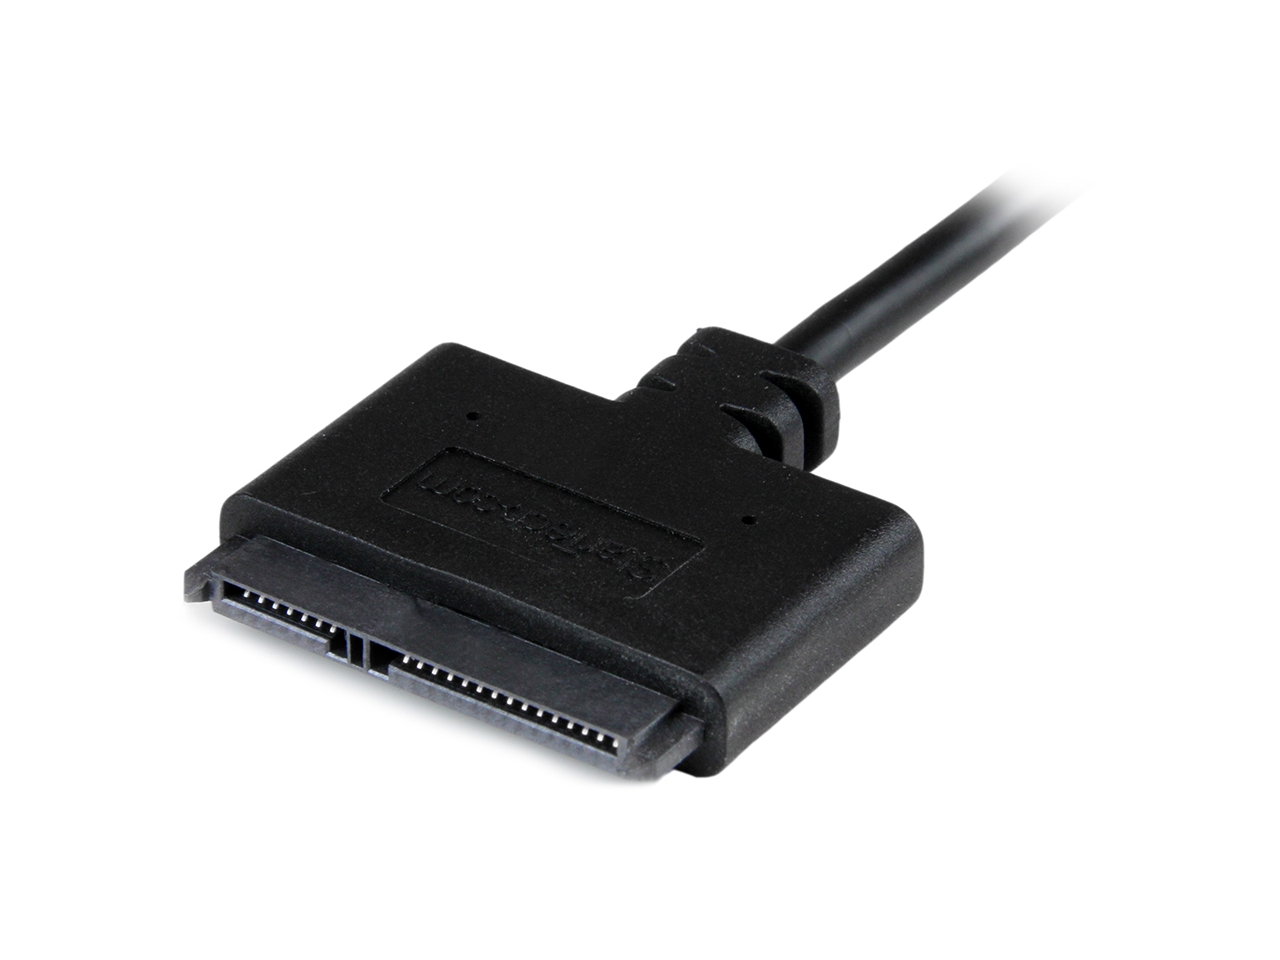 EDT-USB 3.0 to 2.5 SATA III Hard Drive Adapter Cable/UASP SATA to USB 3.0 Converter for SSD/HDD Hard Drive Adapter Cable